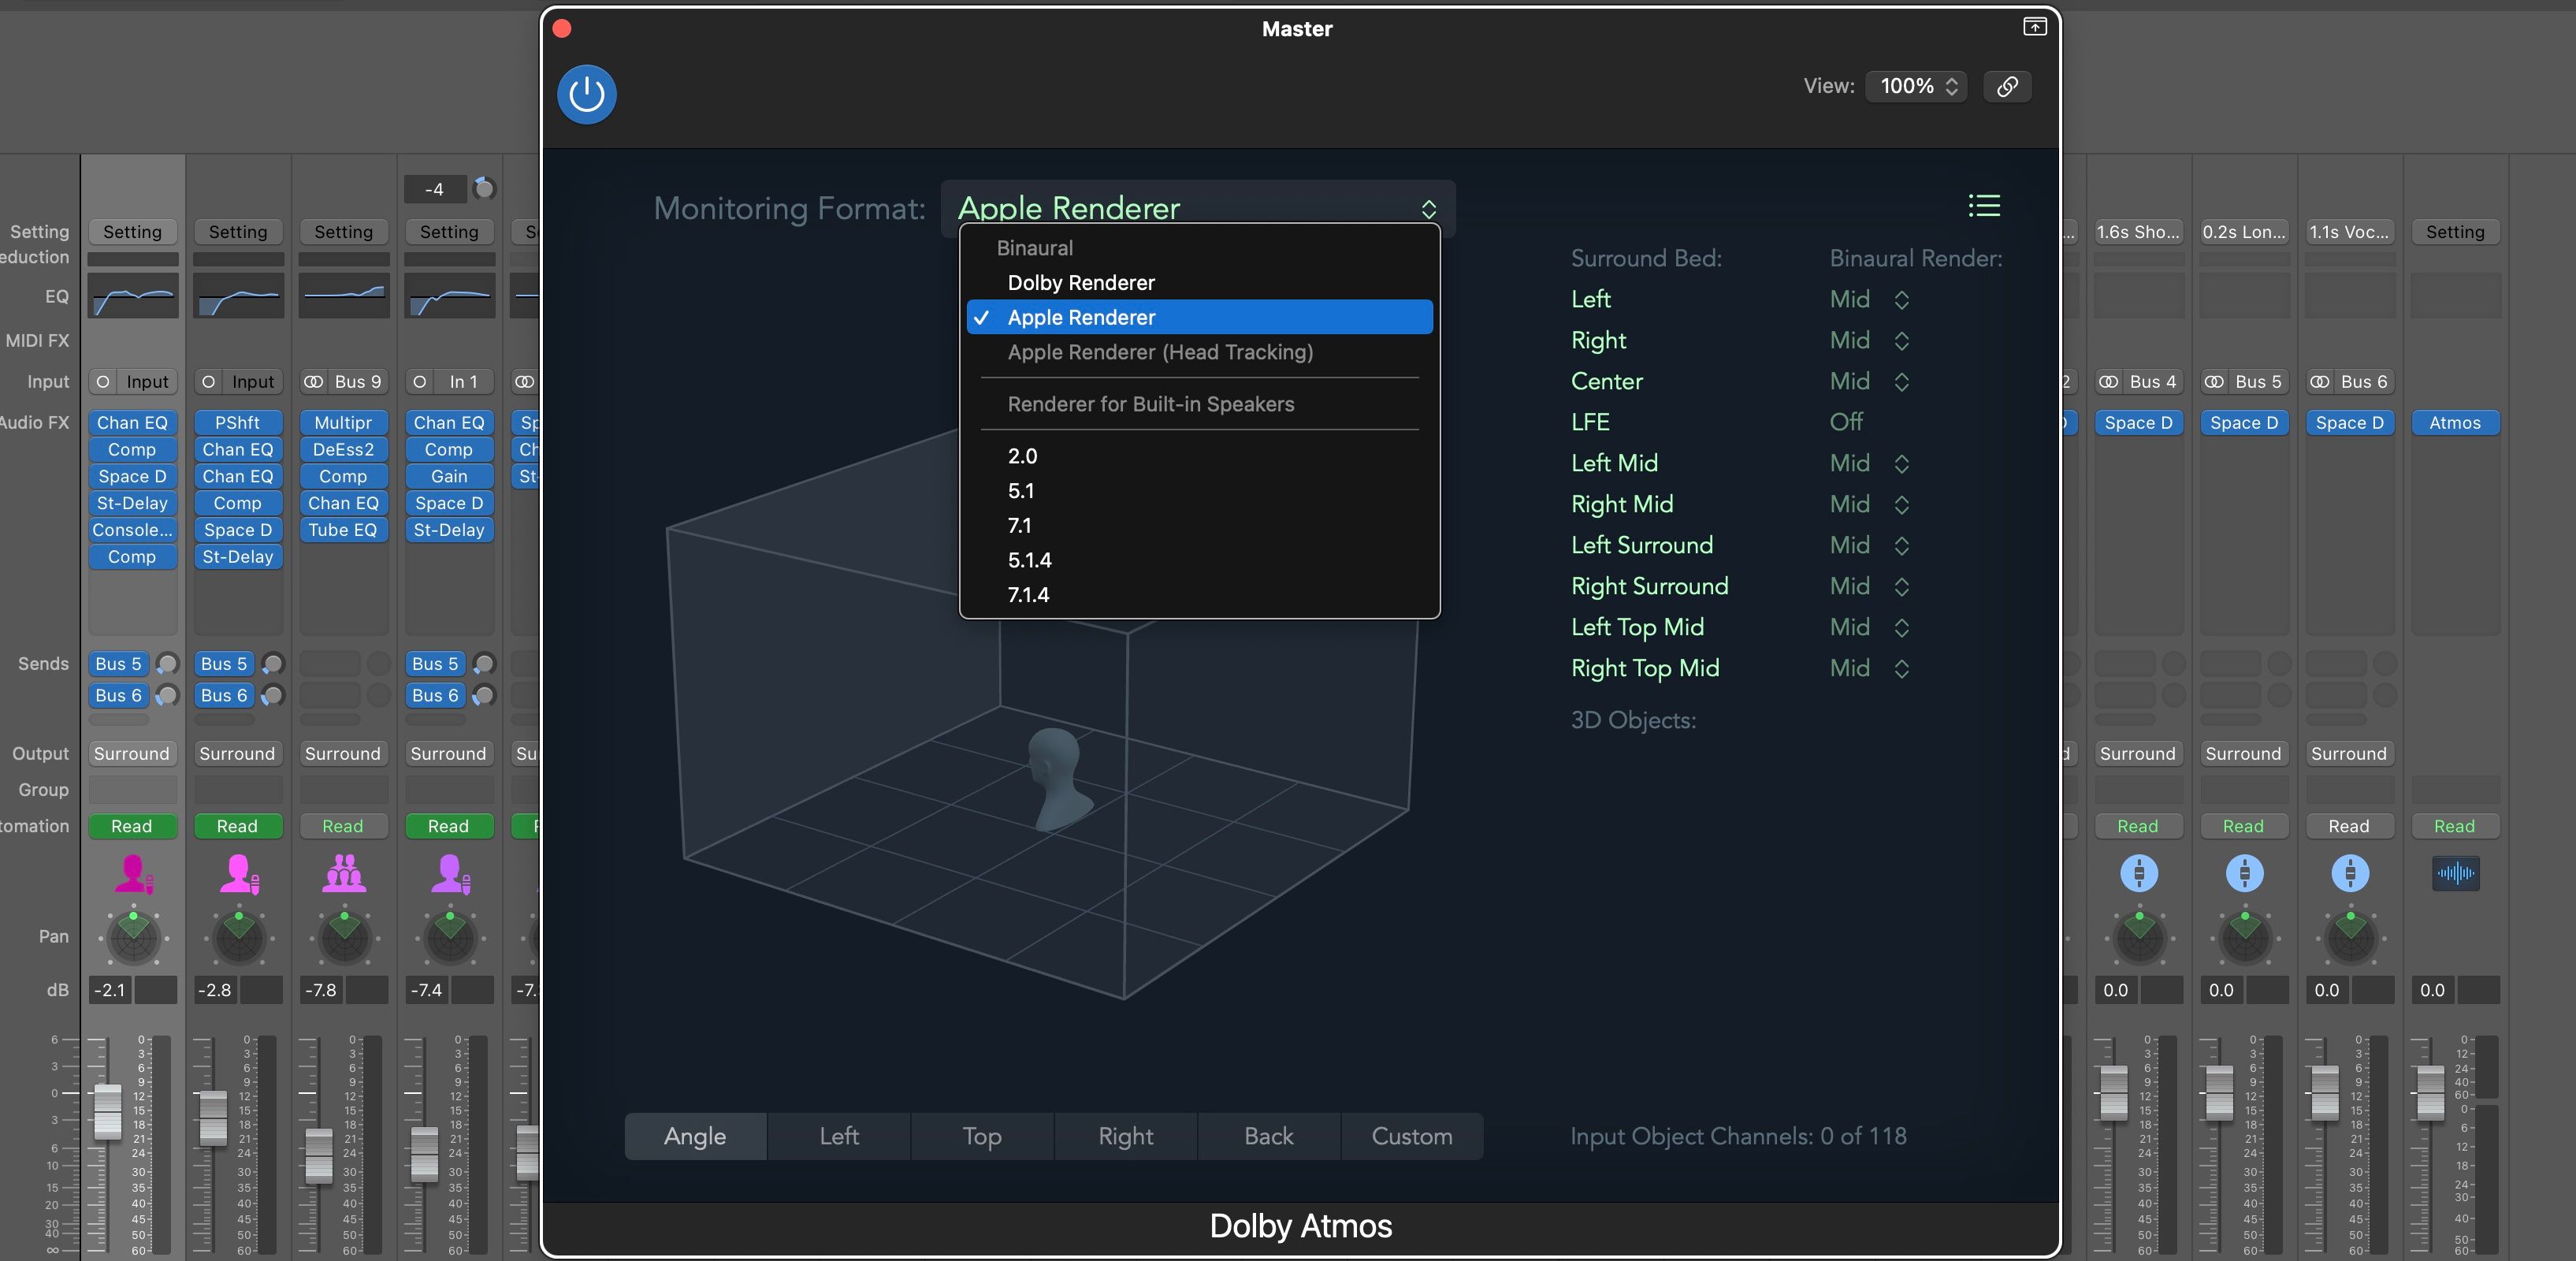 A screenshot of Logic Pro showing the Dolby Atmos plugin